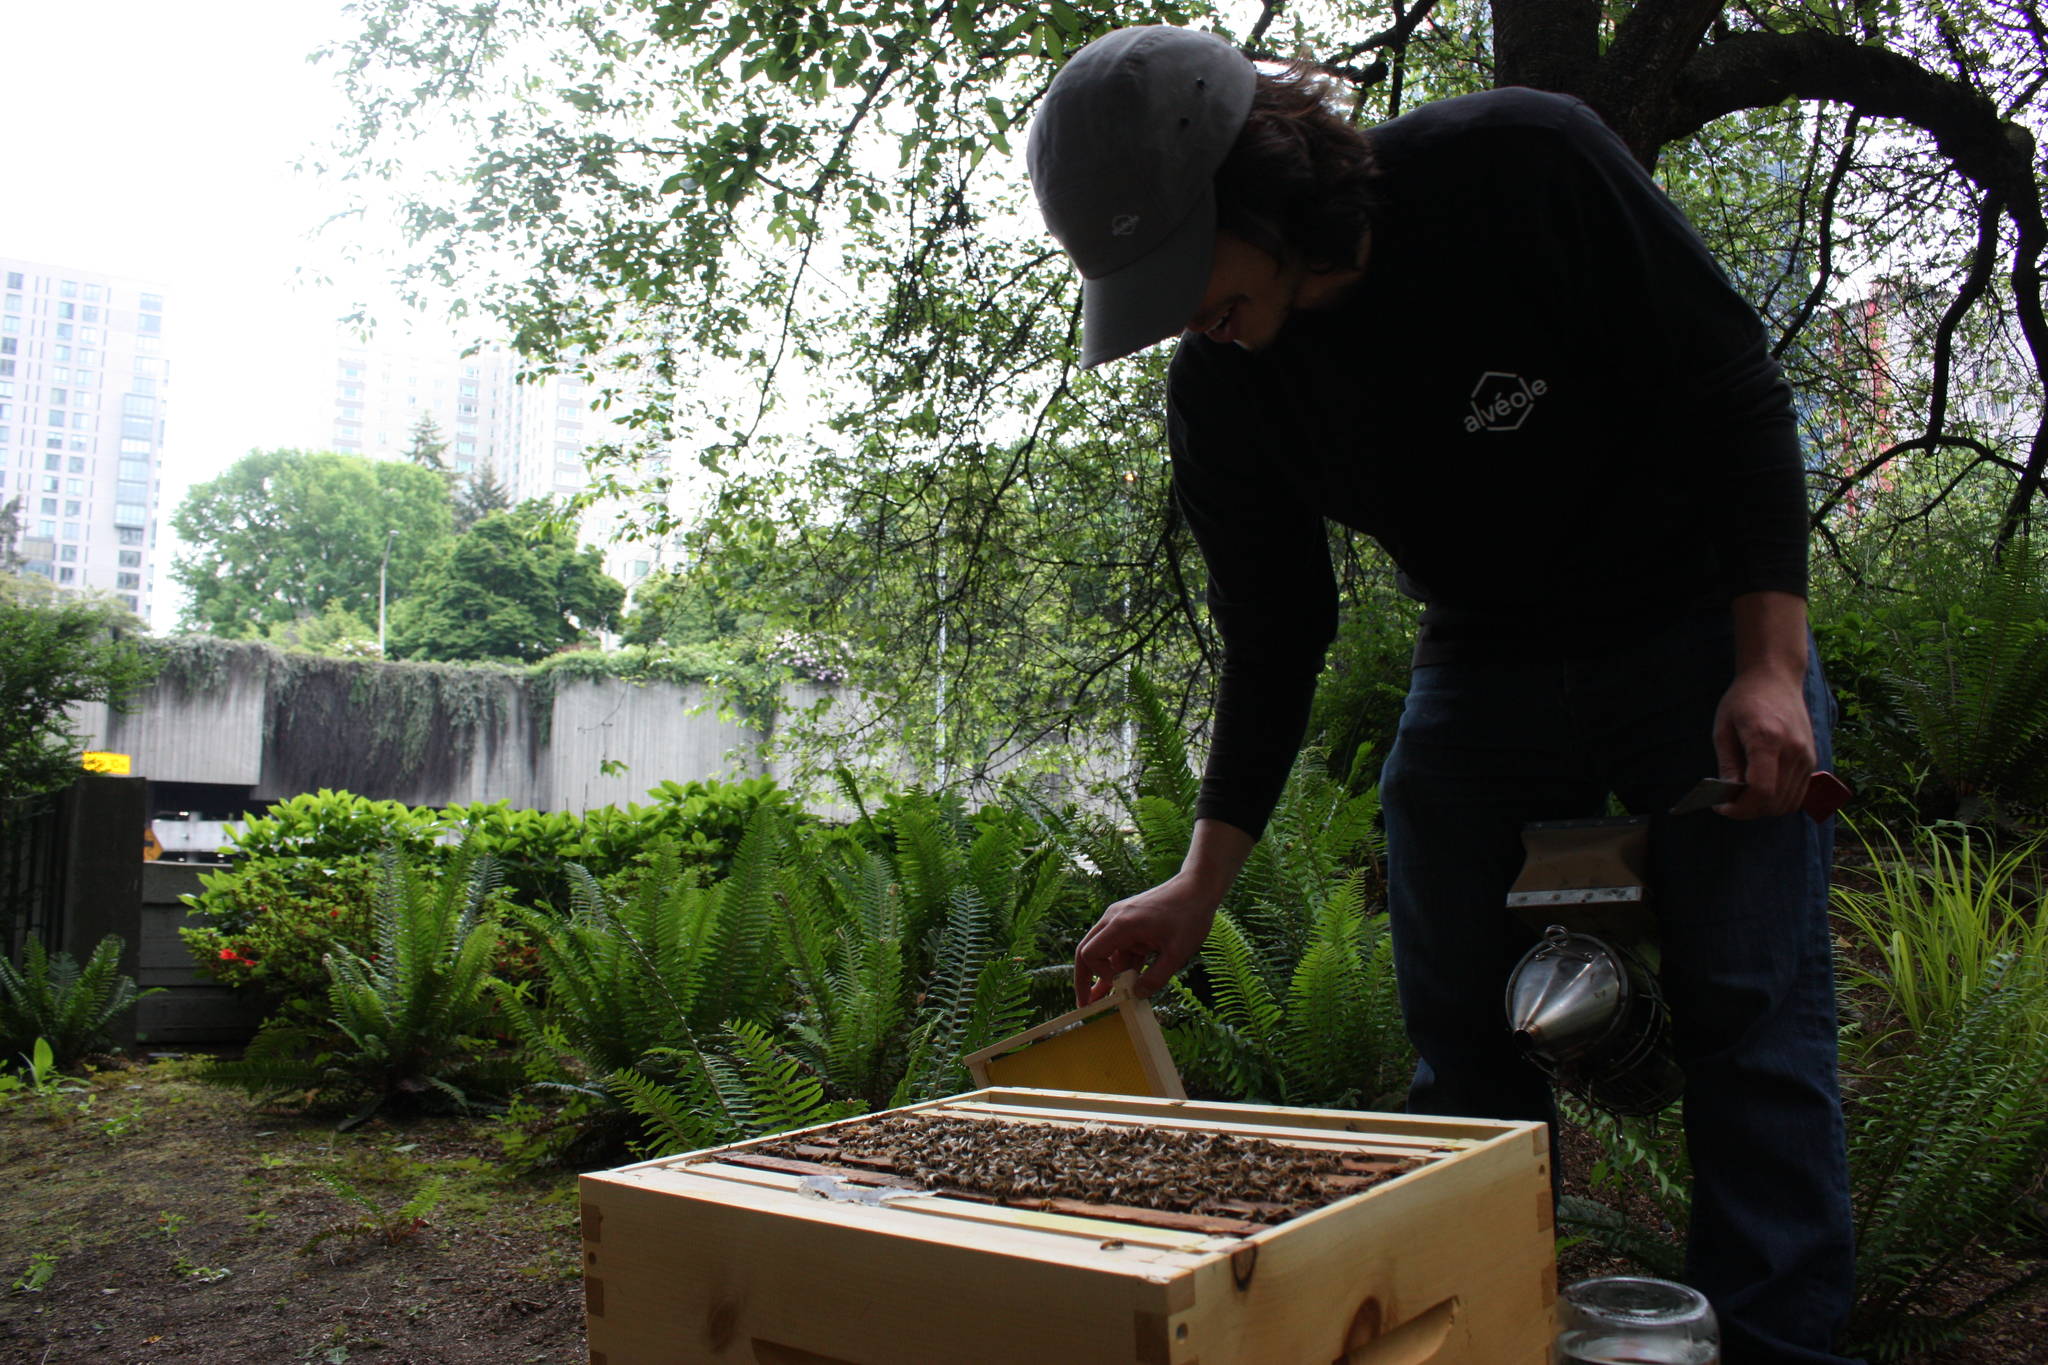 Pedro Miola using smoke to pacify the bees as he opens the box. (Photo by Cameron Sheppard)